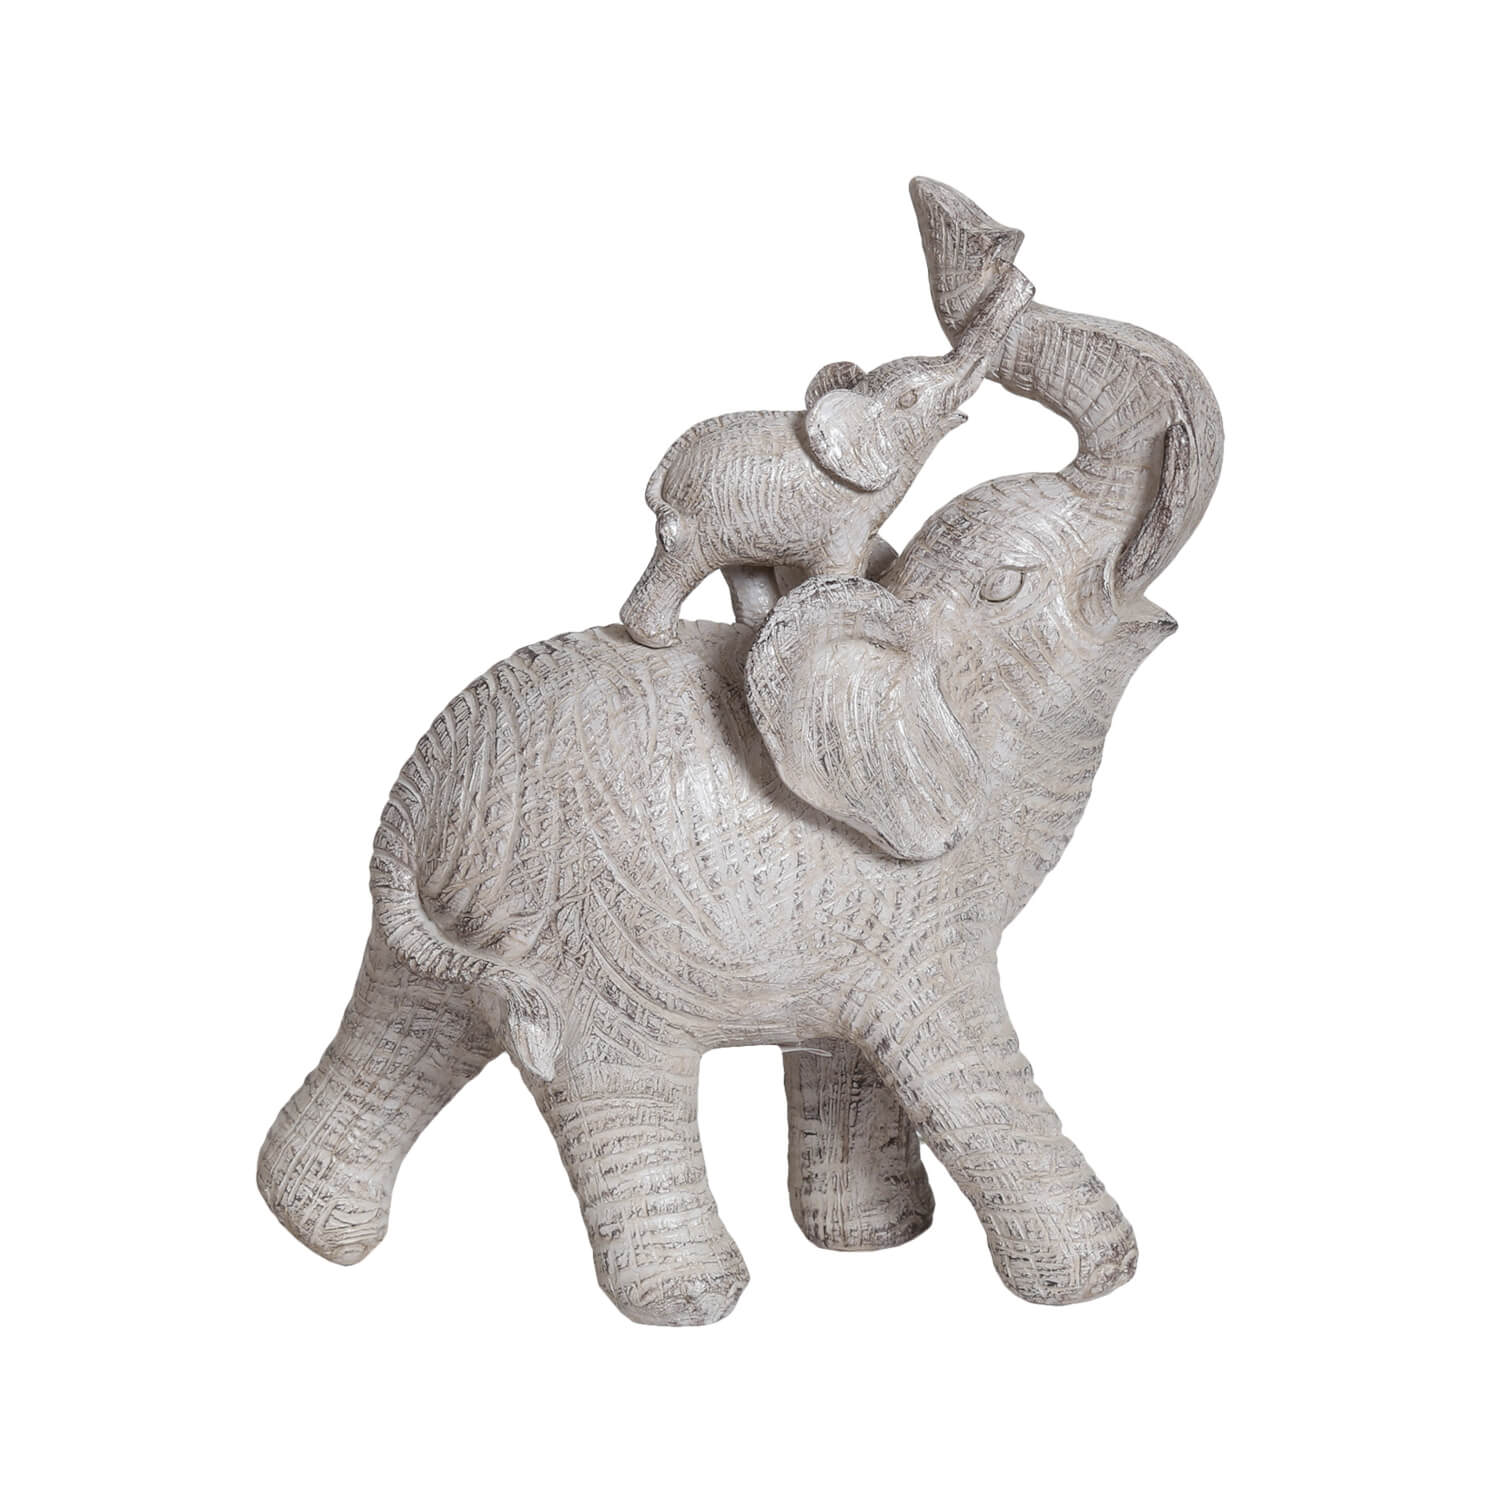 The Home Collection Elephant Figurine - 23cm 1 Shaws Department Stores